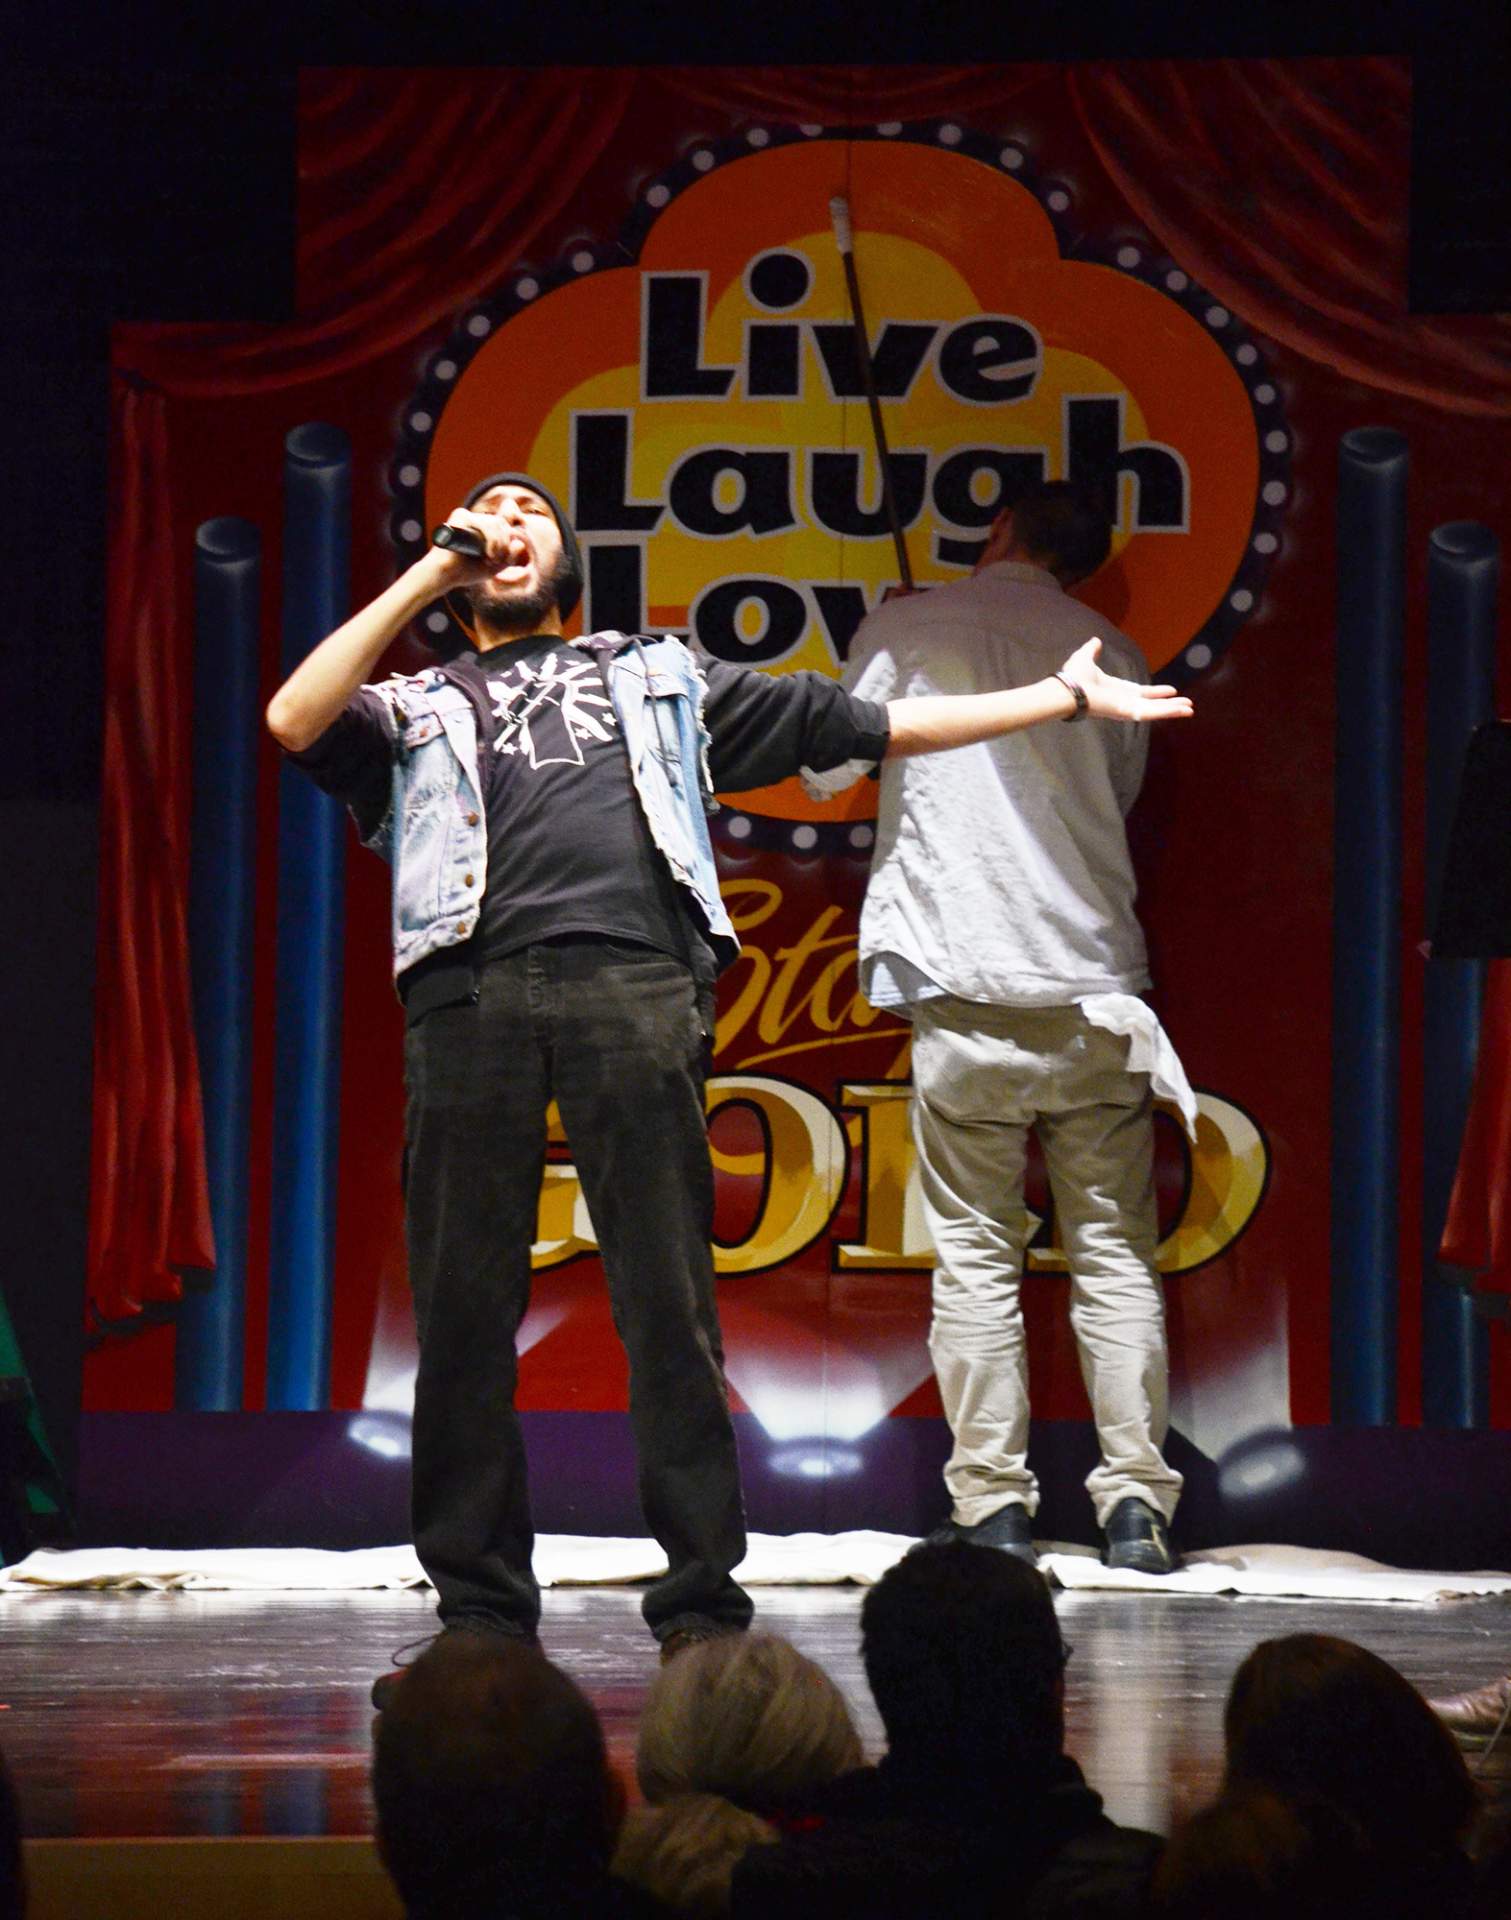 Poet Josh Smith participating in "Live, Laugh, Love & Stay Gold: The Gameshow"